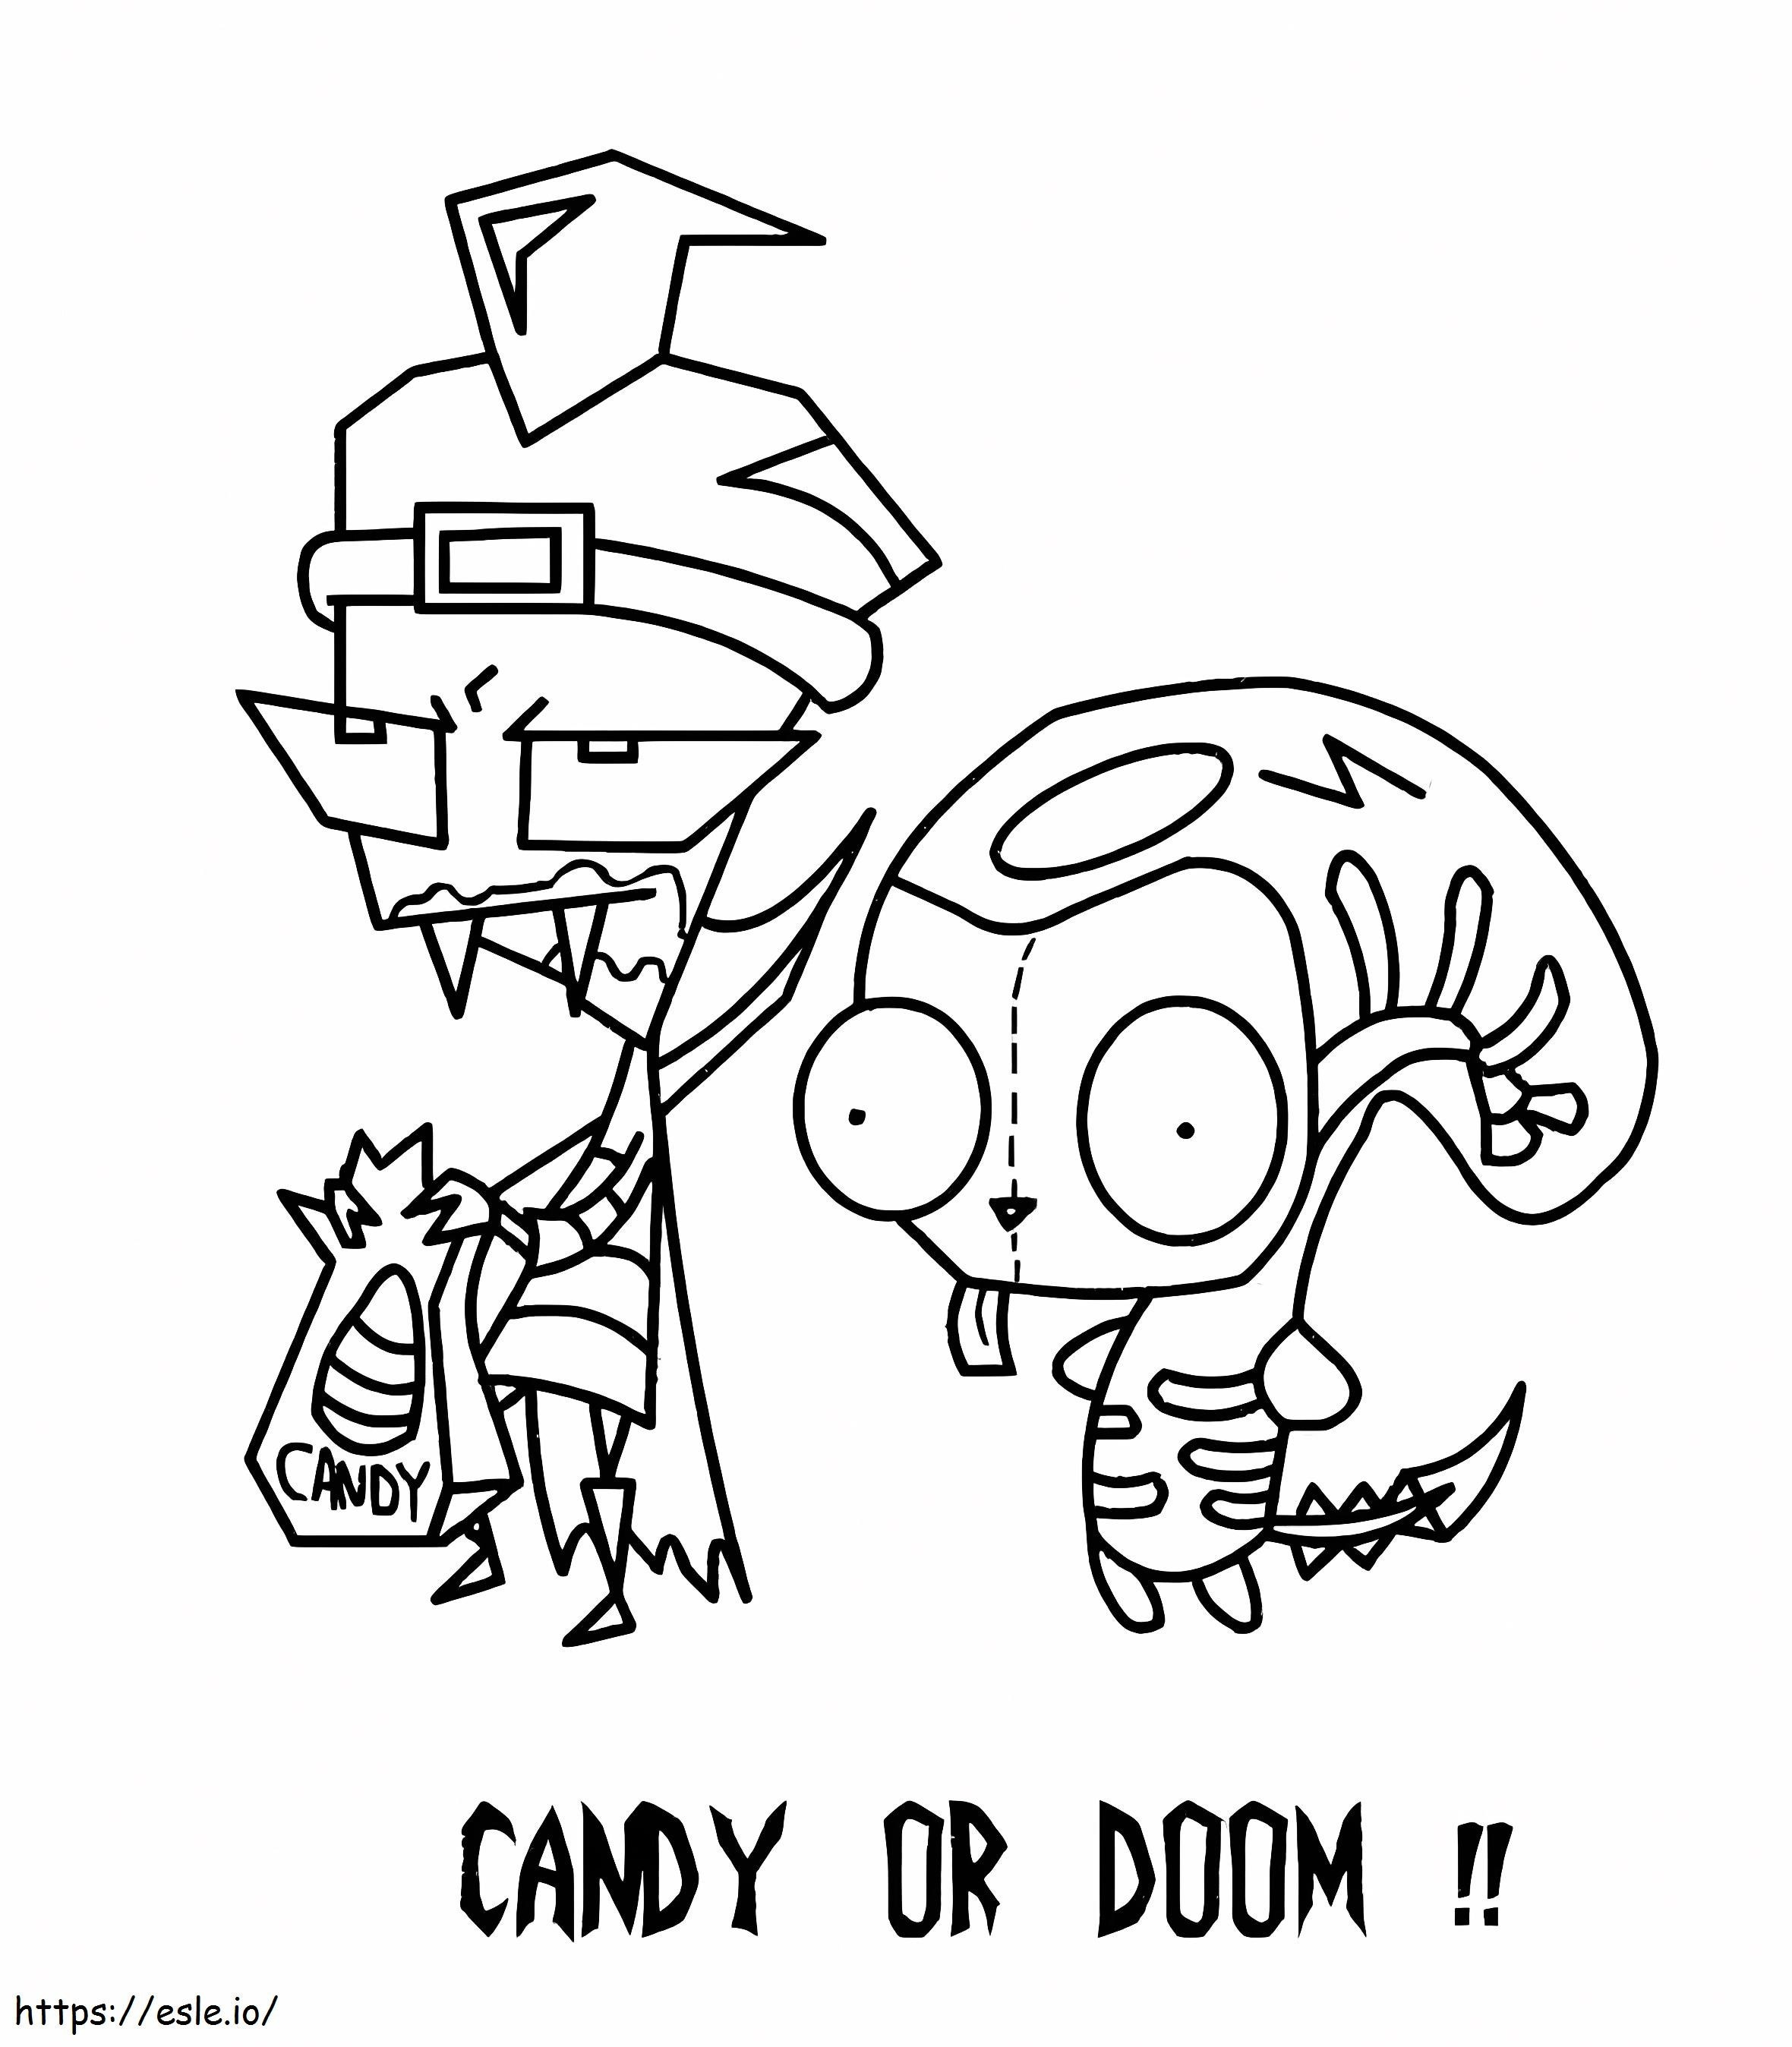 Candy Or Doom Invader Zim coloring page